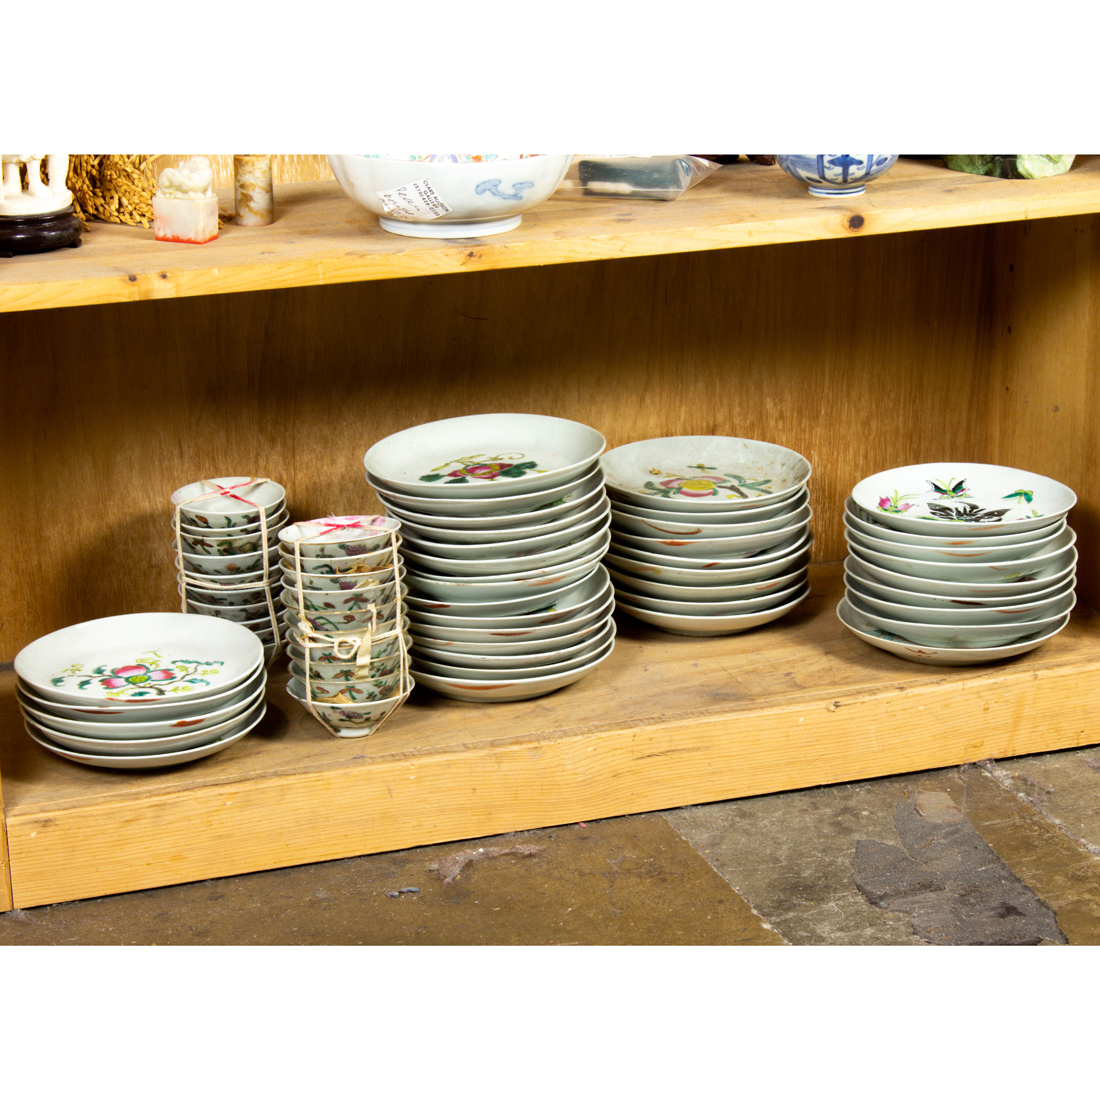 SHELF OF CHINESE FAMILLE ROSE DISHES 2d2e4d